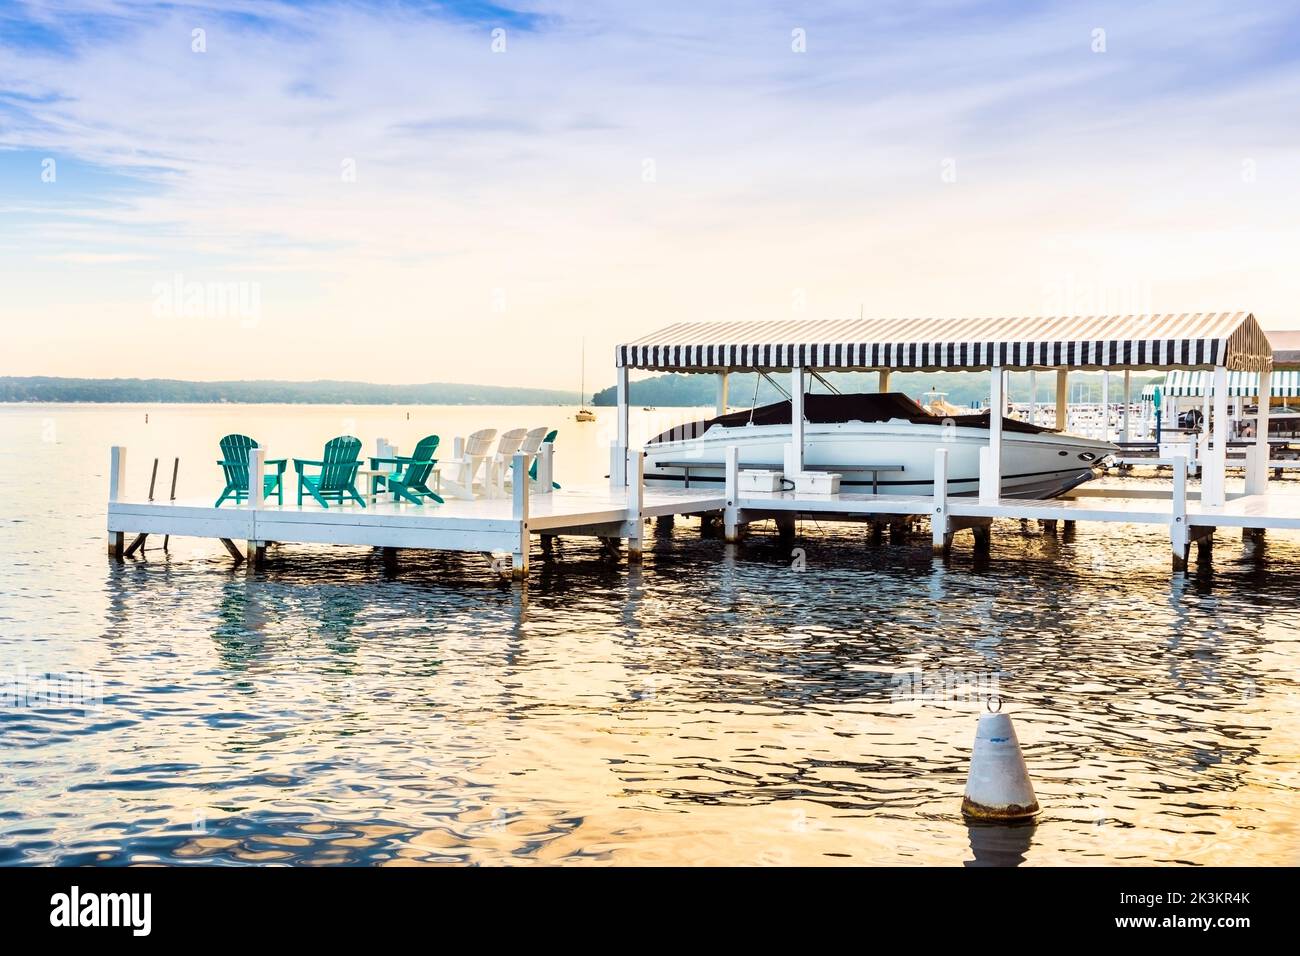 Small wooden pier with private yacht, early morning at Lake Geneva, Wisconsin, America. Stock Photo